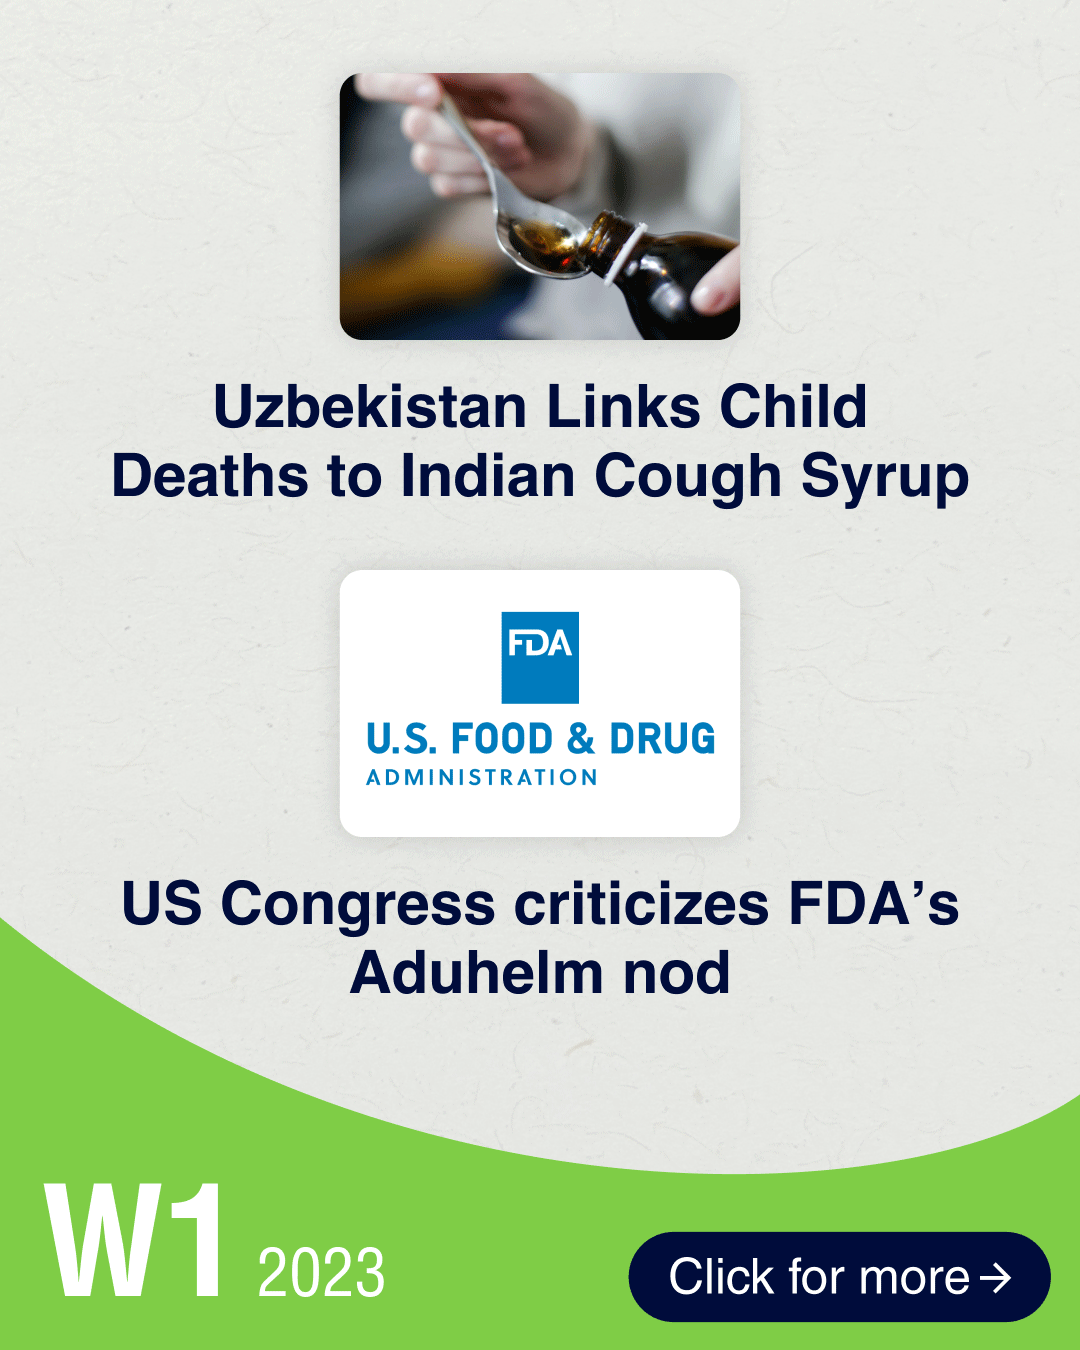 After Gambia, Uzbekistan links child deaths to Indian cough syrup; US Congress criticizes FDA’s Aduhelm nod